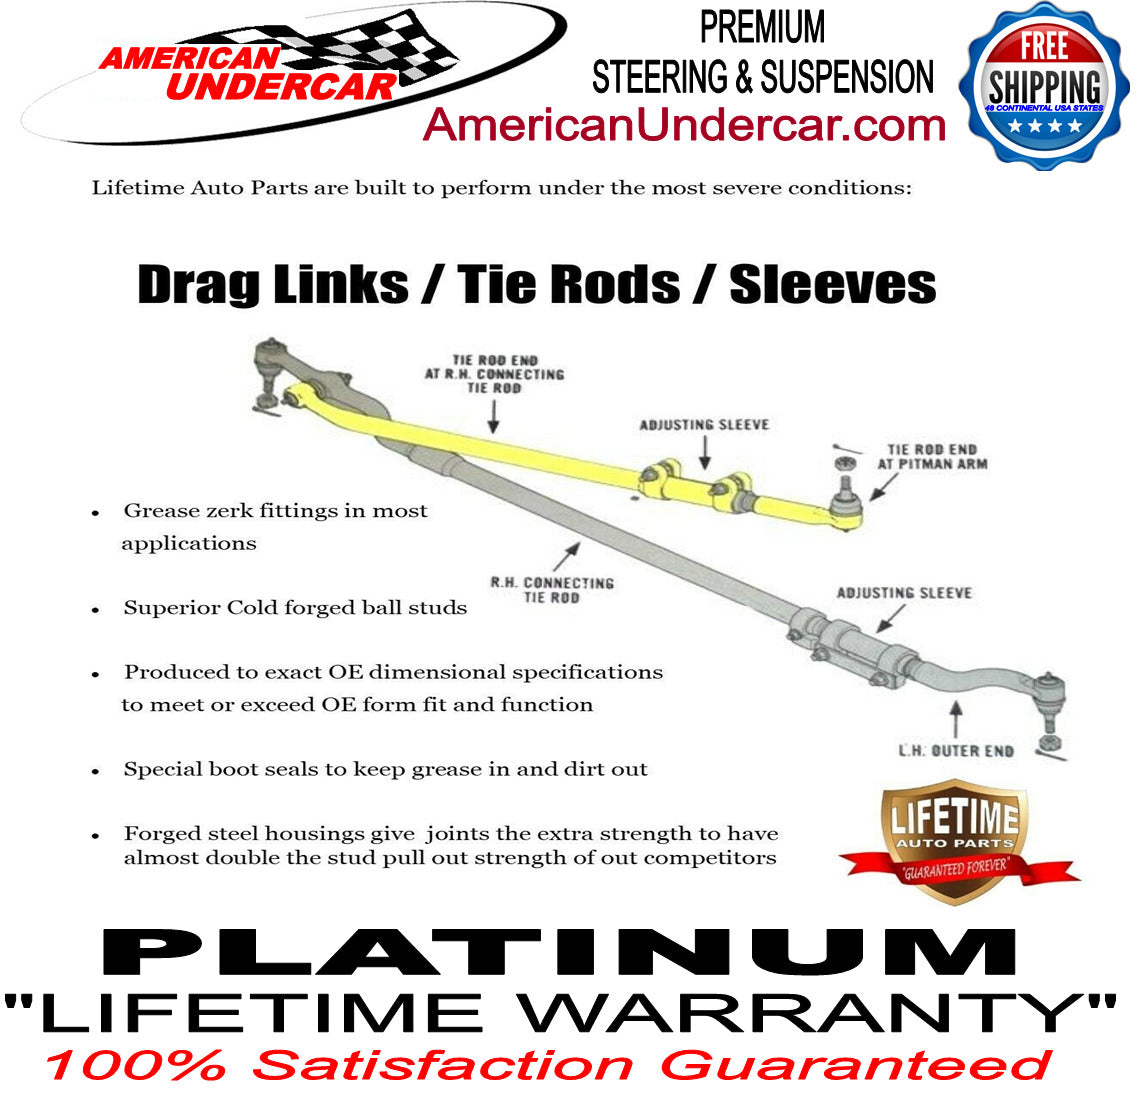 Lifetime Drag Link Tie Rod Sleeve Kit for 2011-2016 Ford F450, F550 Super Duty with Wide Track Axle